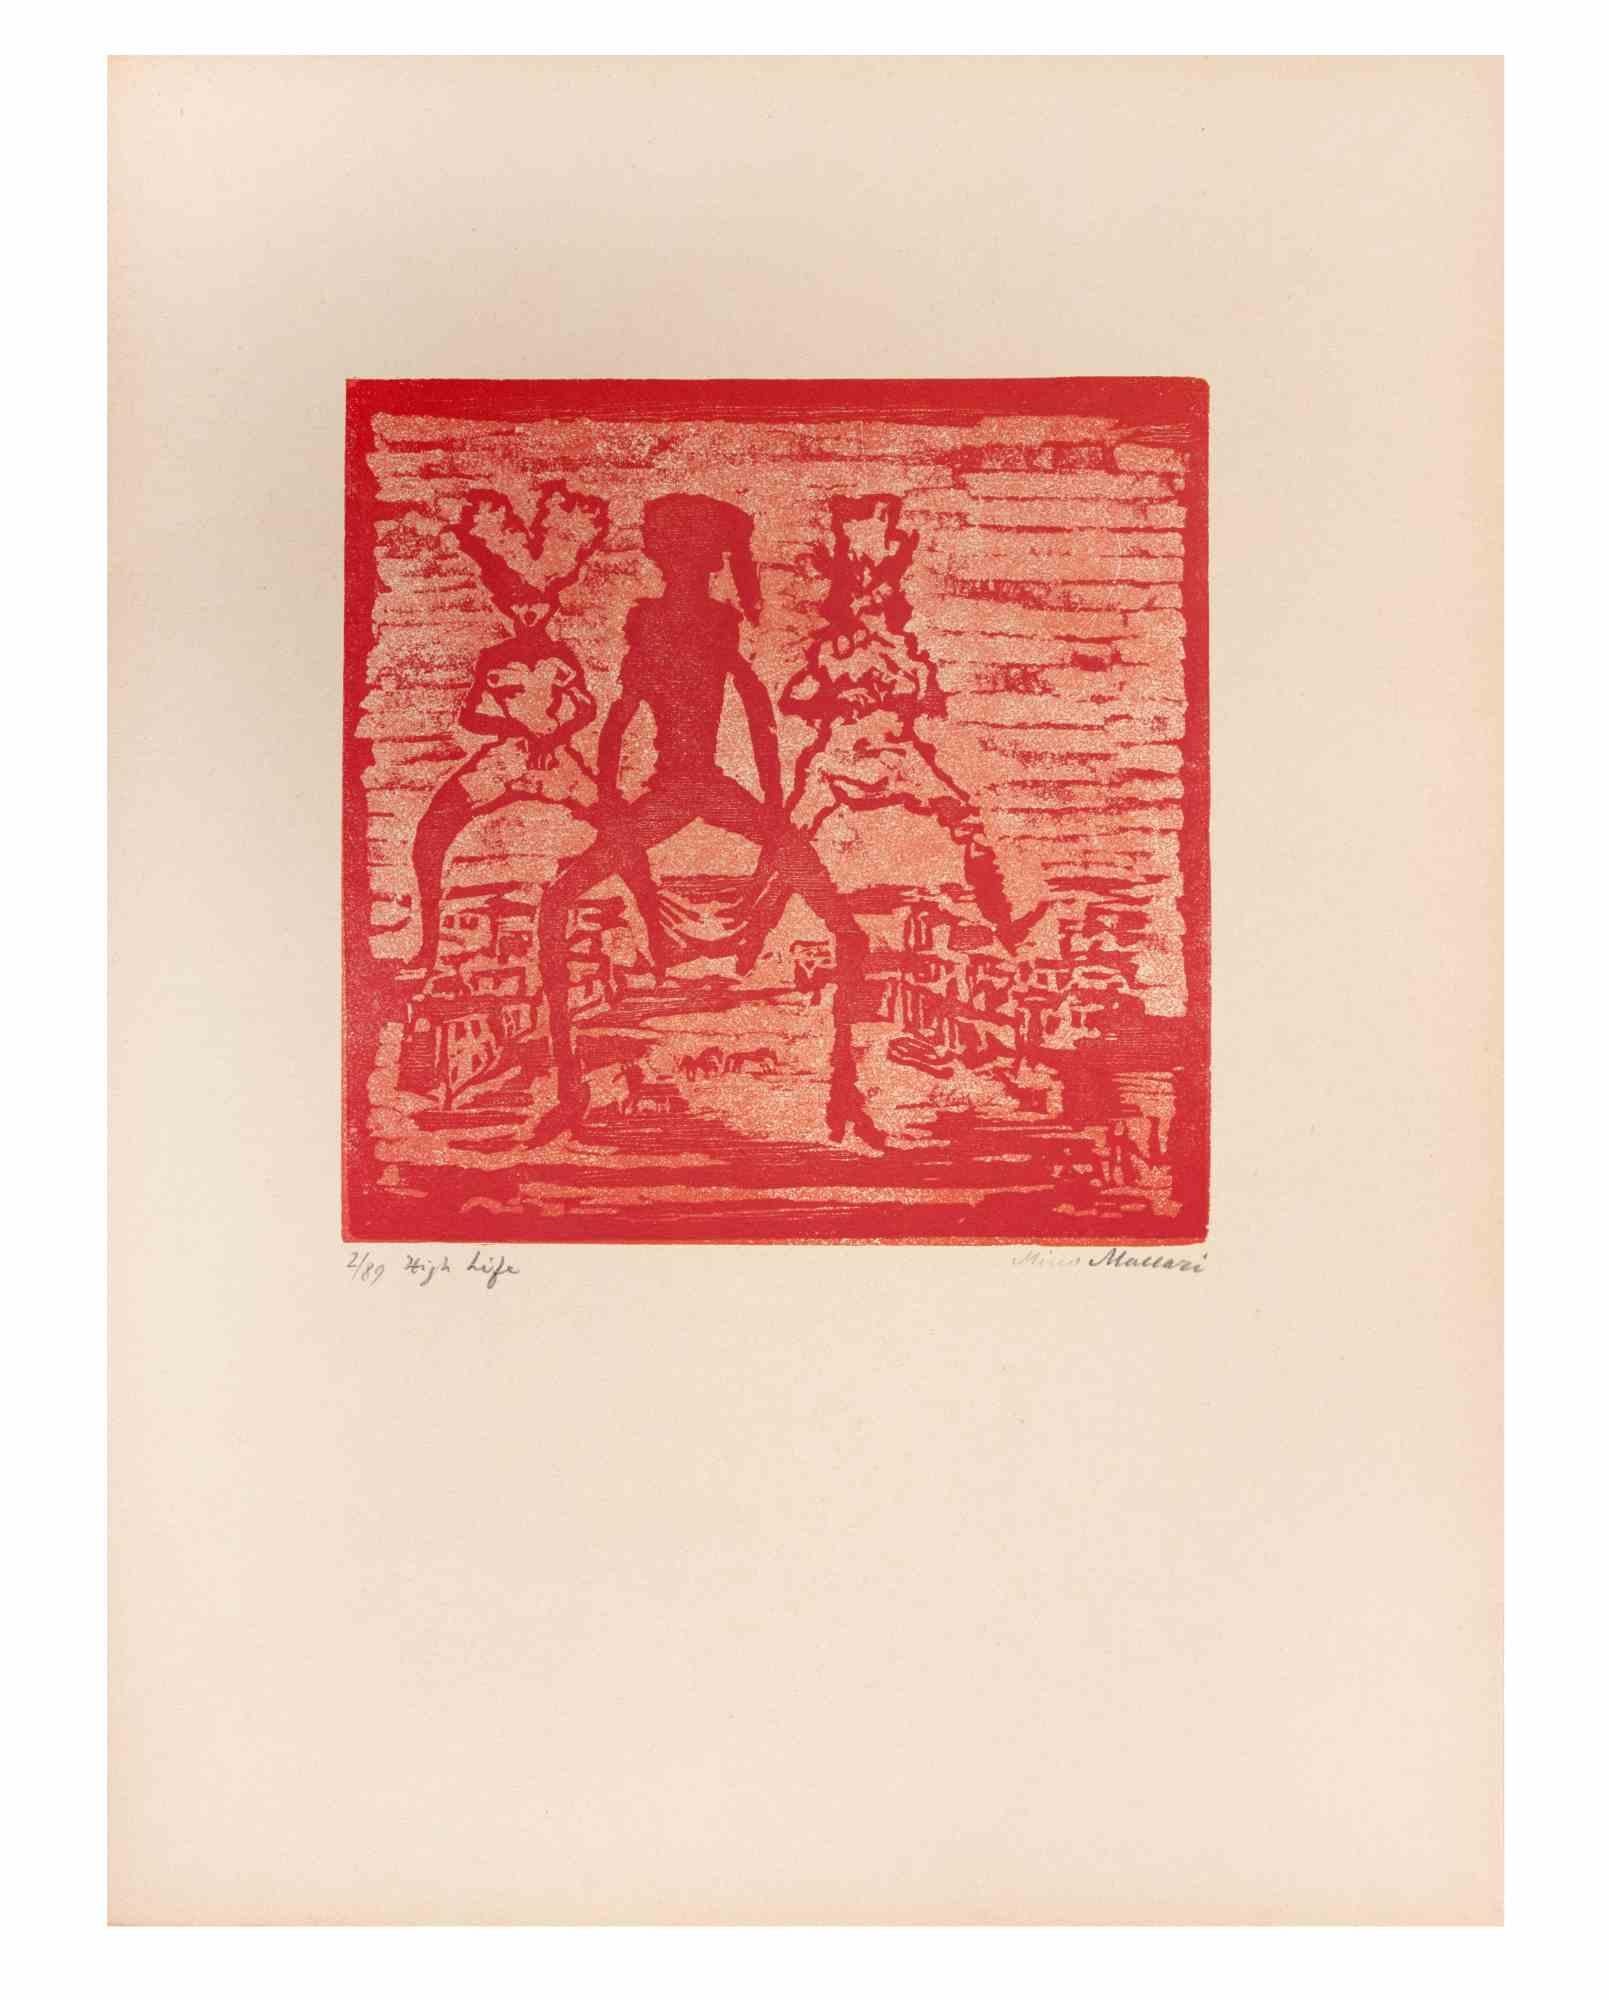 Life is an Artwork realized by Mino Maccari  (1924-1989) in the Mid-20th Century.

Colored woodcut on paper. Hand-signed on the lower, numbered 2/89 specimens and titled on the left margin.

Good conditions.

Mino Maccari (Siena, 1924-Rome, June 16,